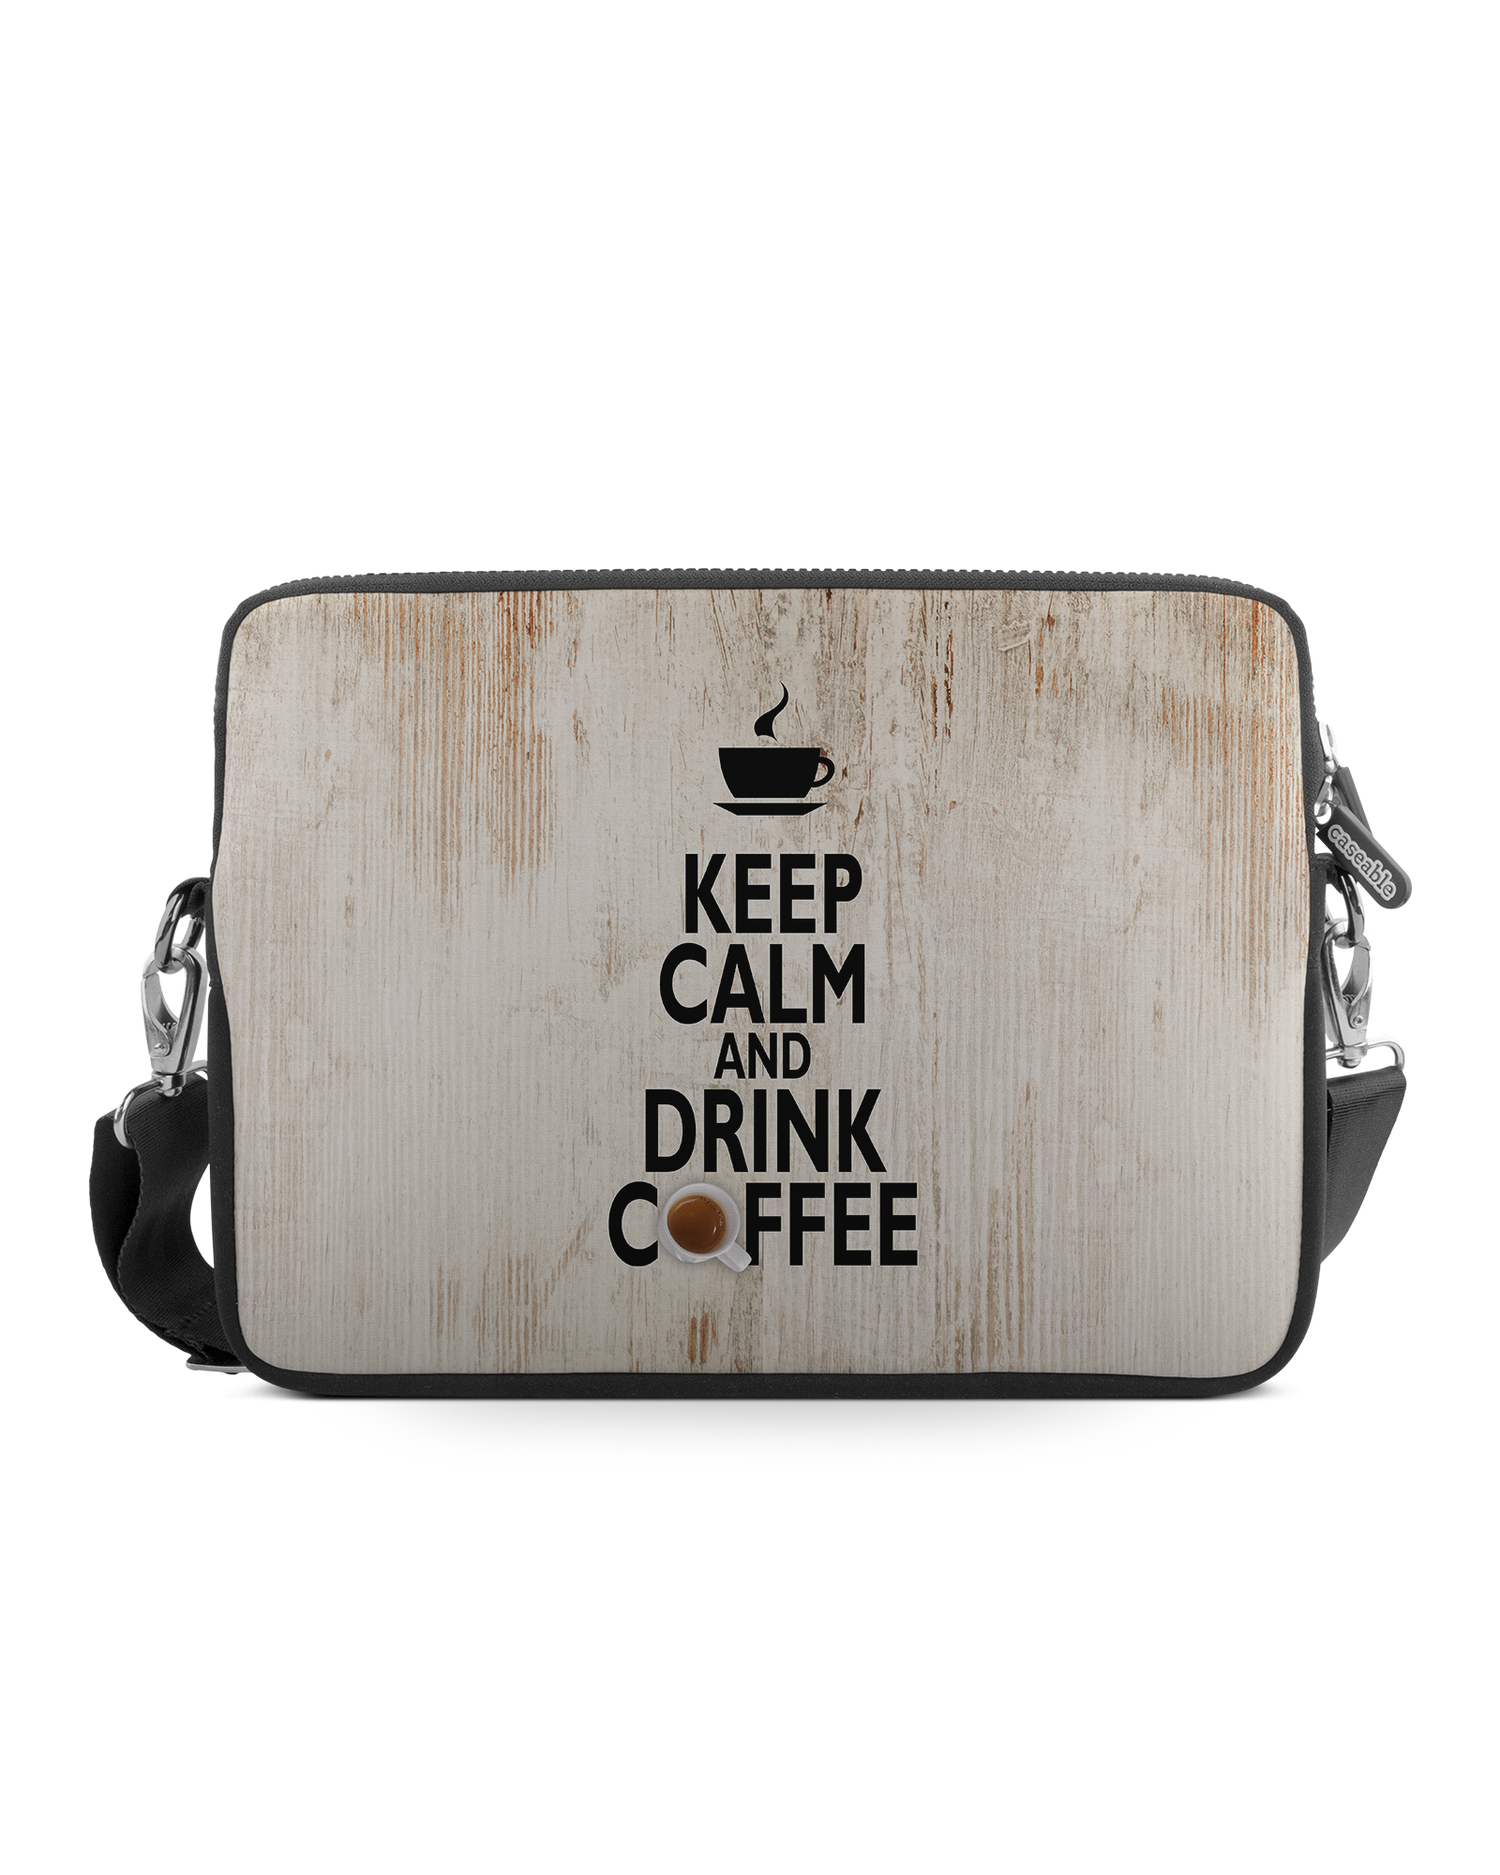 Drink Coffee Premium Laptop Bag 17 inch: Front View